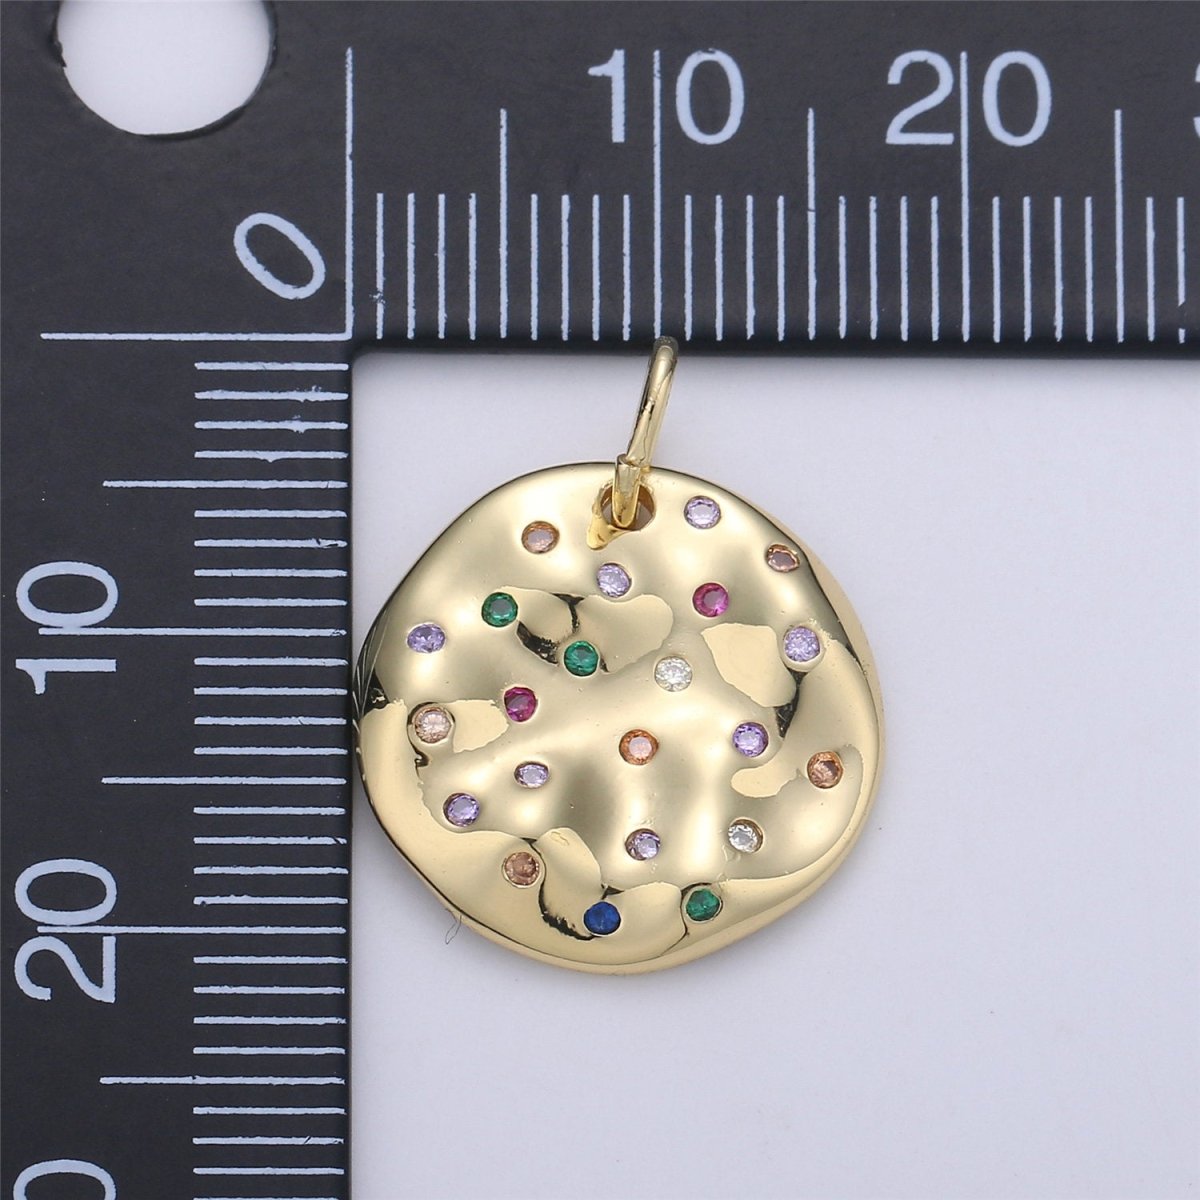 24K Gold filled Rustic Geometric Dainty Charm with Micro Pave Multi Color Rainbow Cubic Zirconia CZ Stone for Necklace or Bracelet, C-904 - DLUXCA